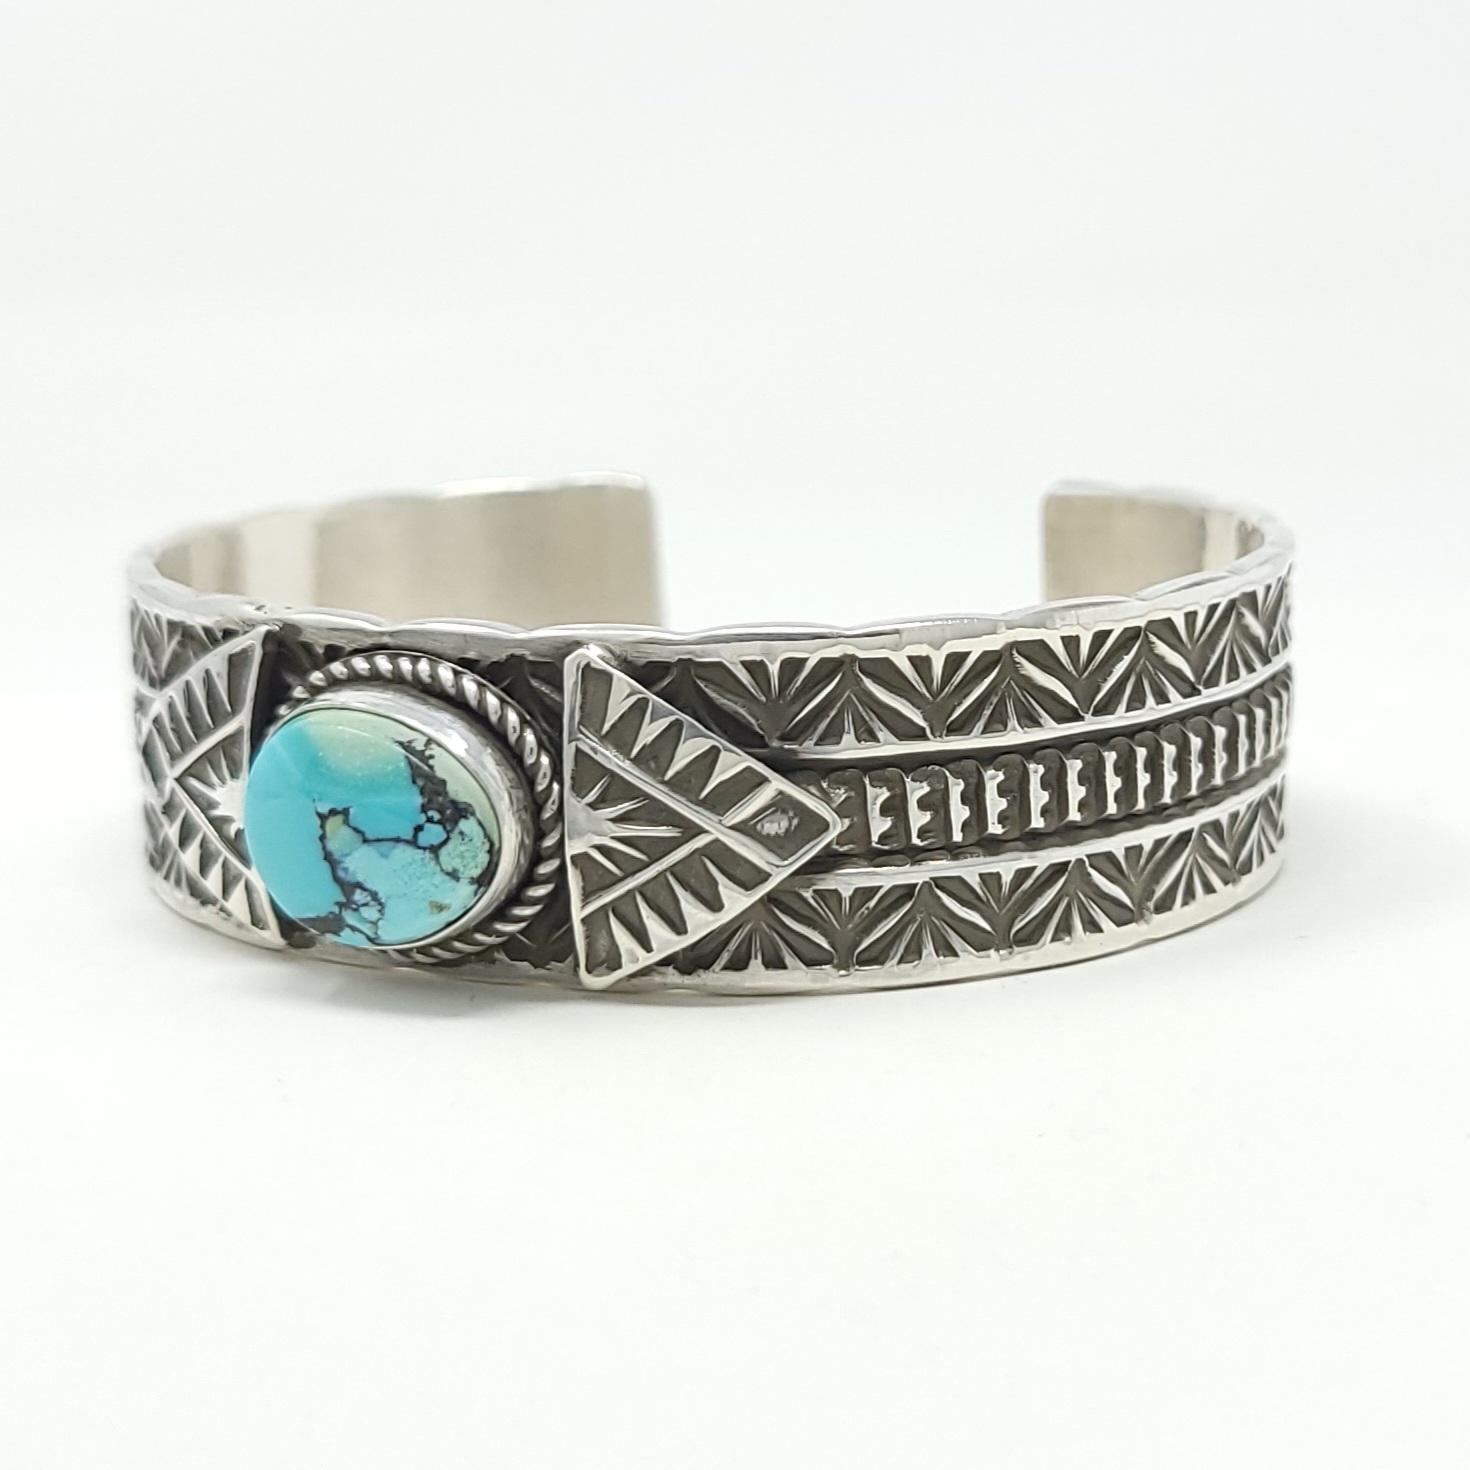 Adrian Reeves Long Navajo Sterling Silver Stacker Cuff Bracelet Nevada Turquoise